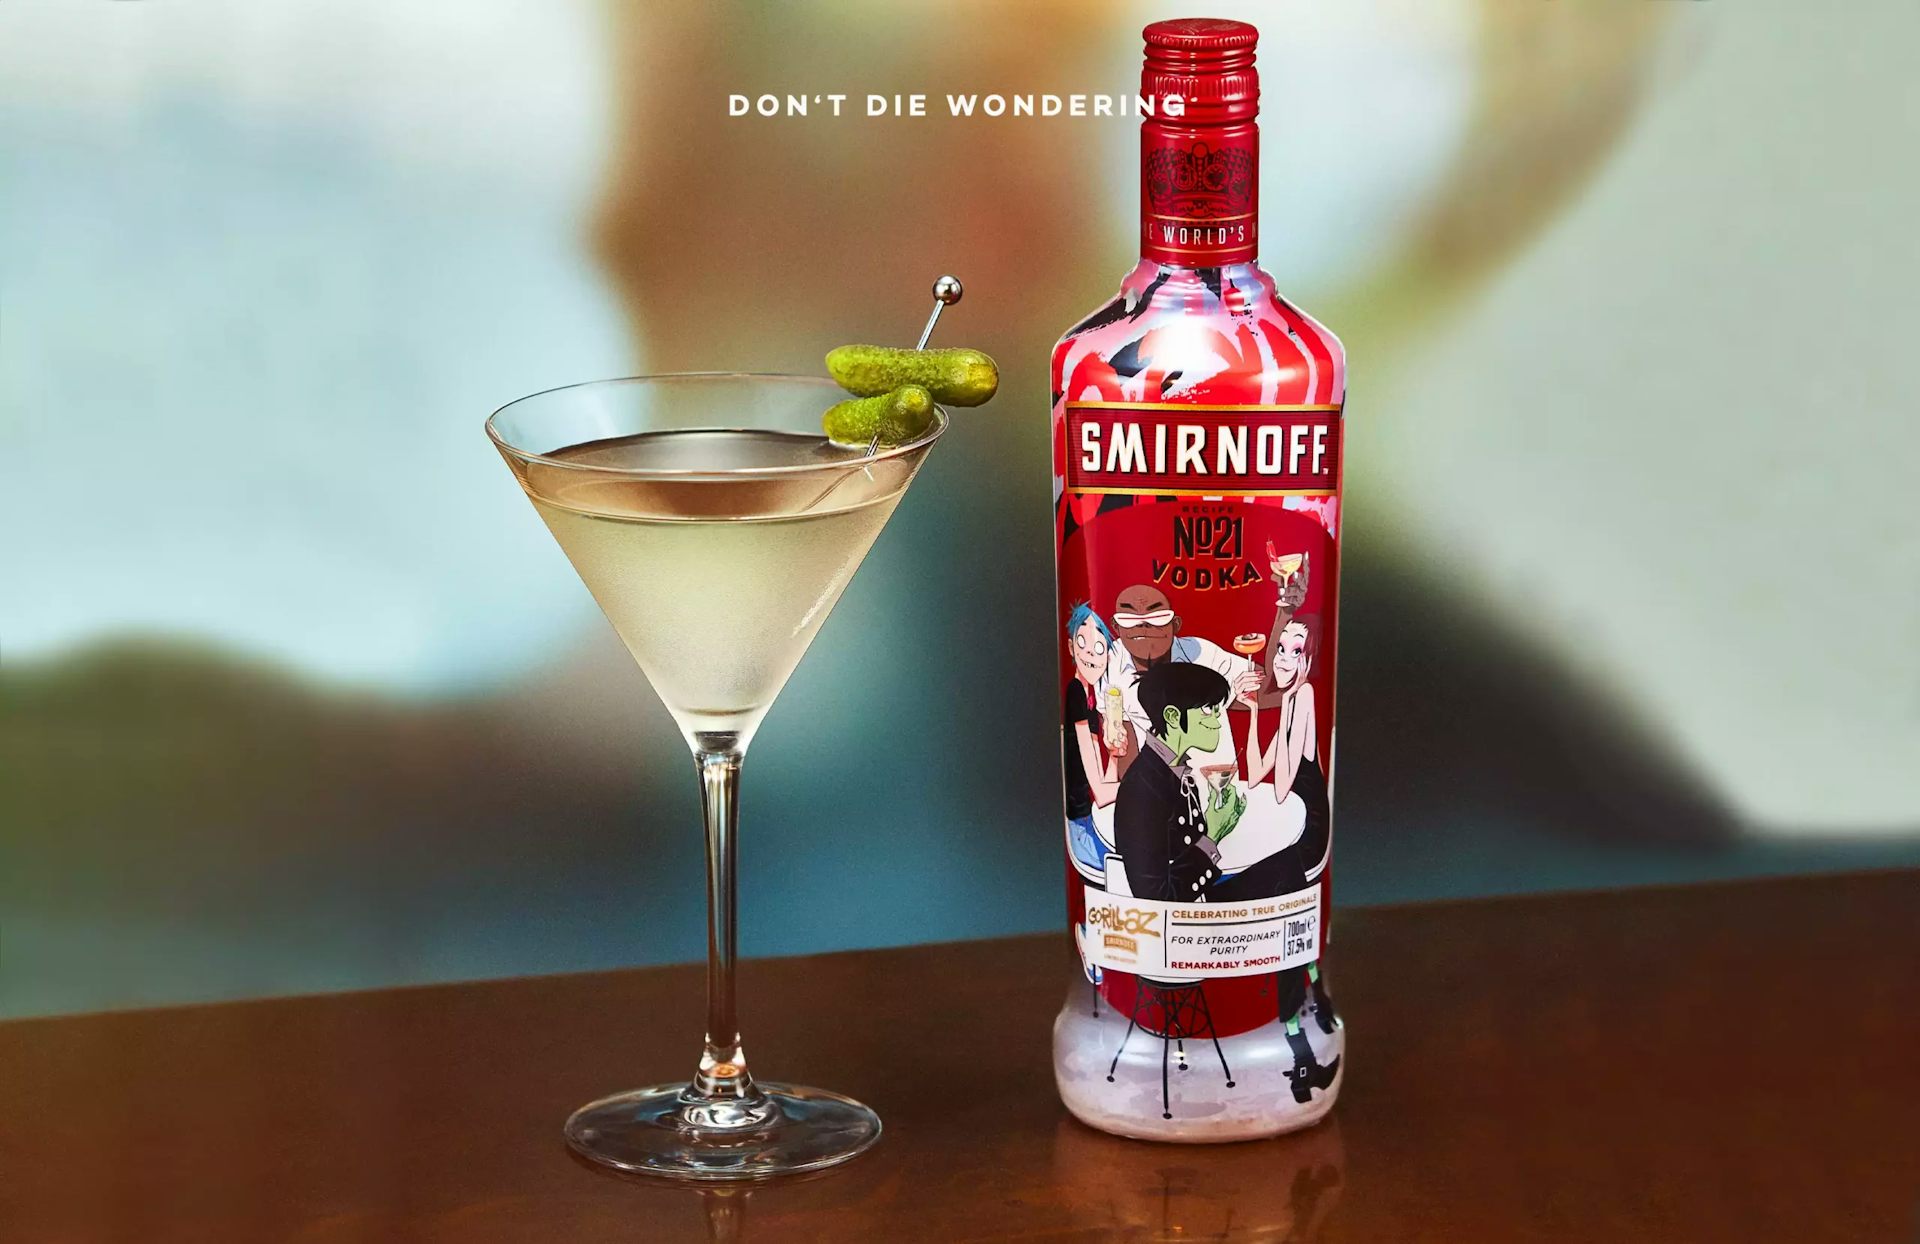 Smirnoff x Gorillaz is Back With a Cocktail Making Live Masterclass